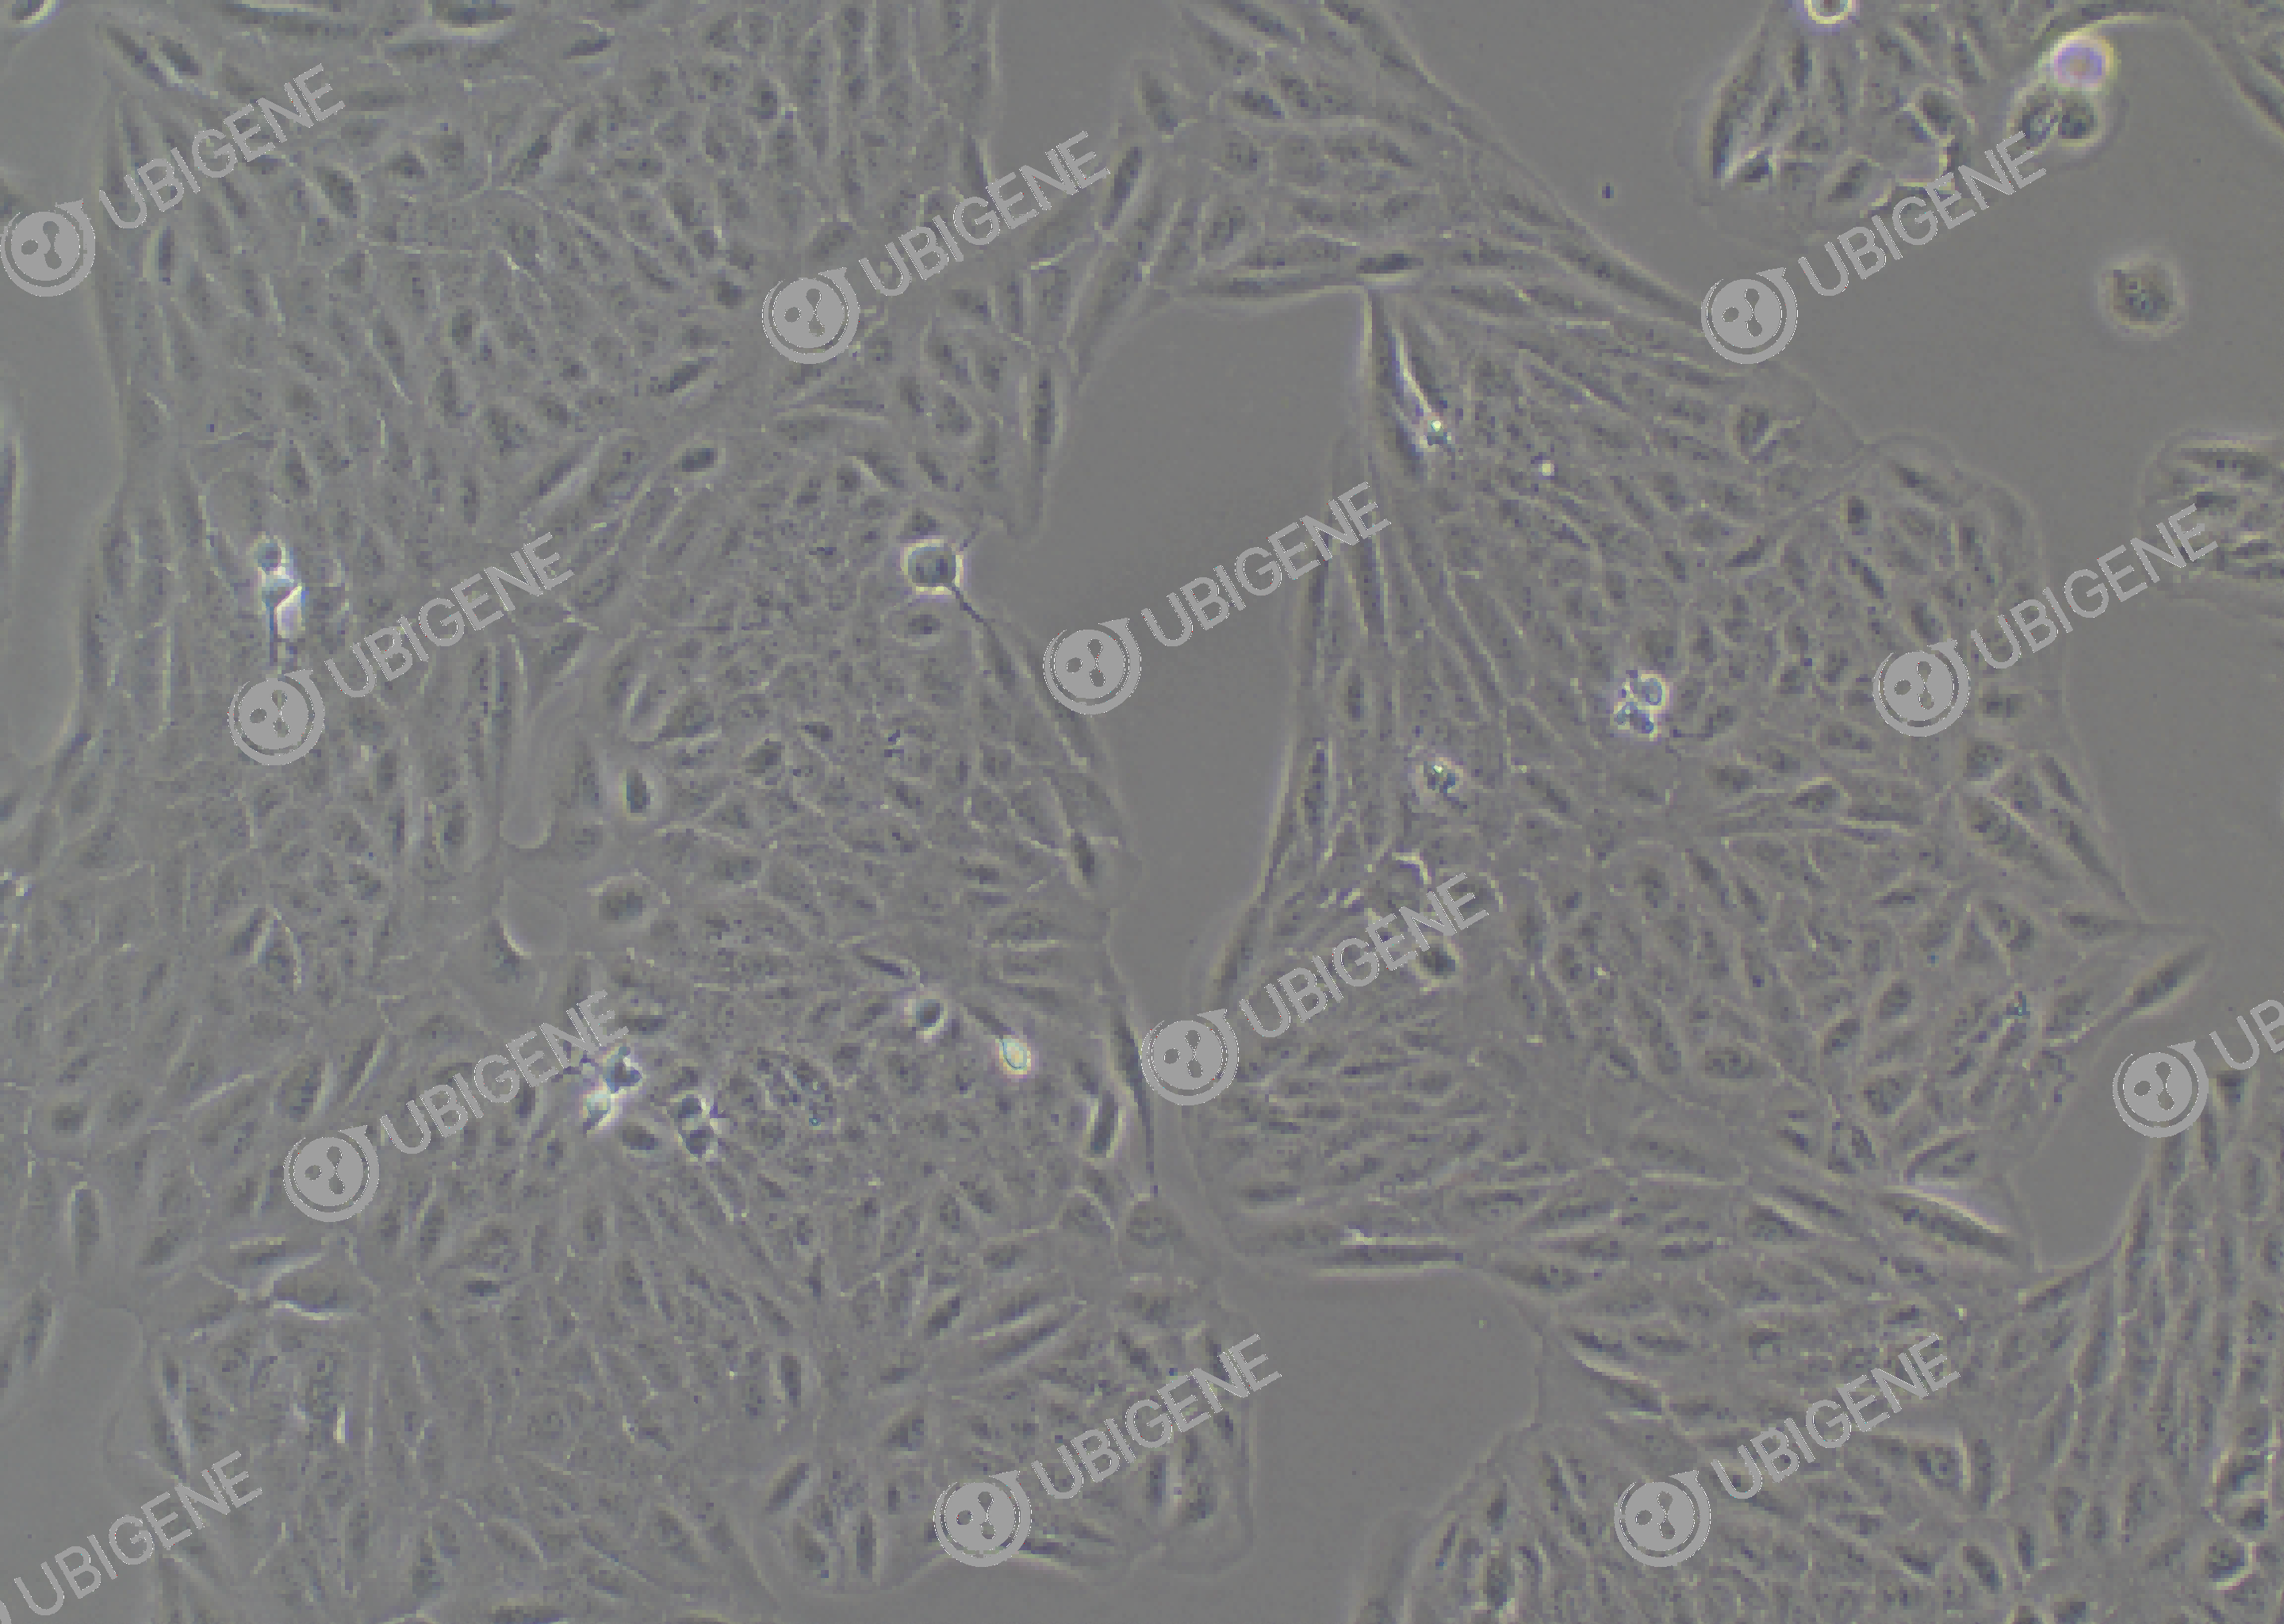 ARPE-19 cell line Cultured cell morphology